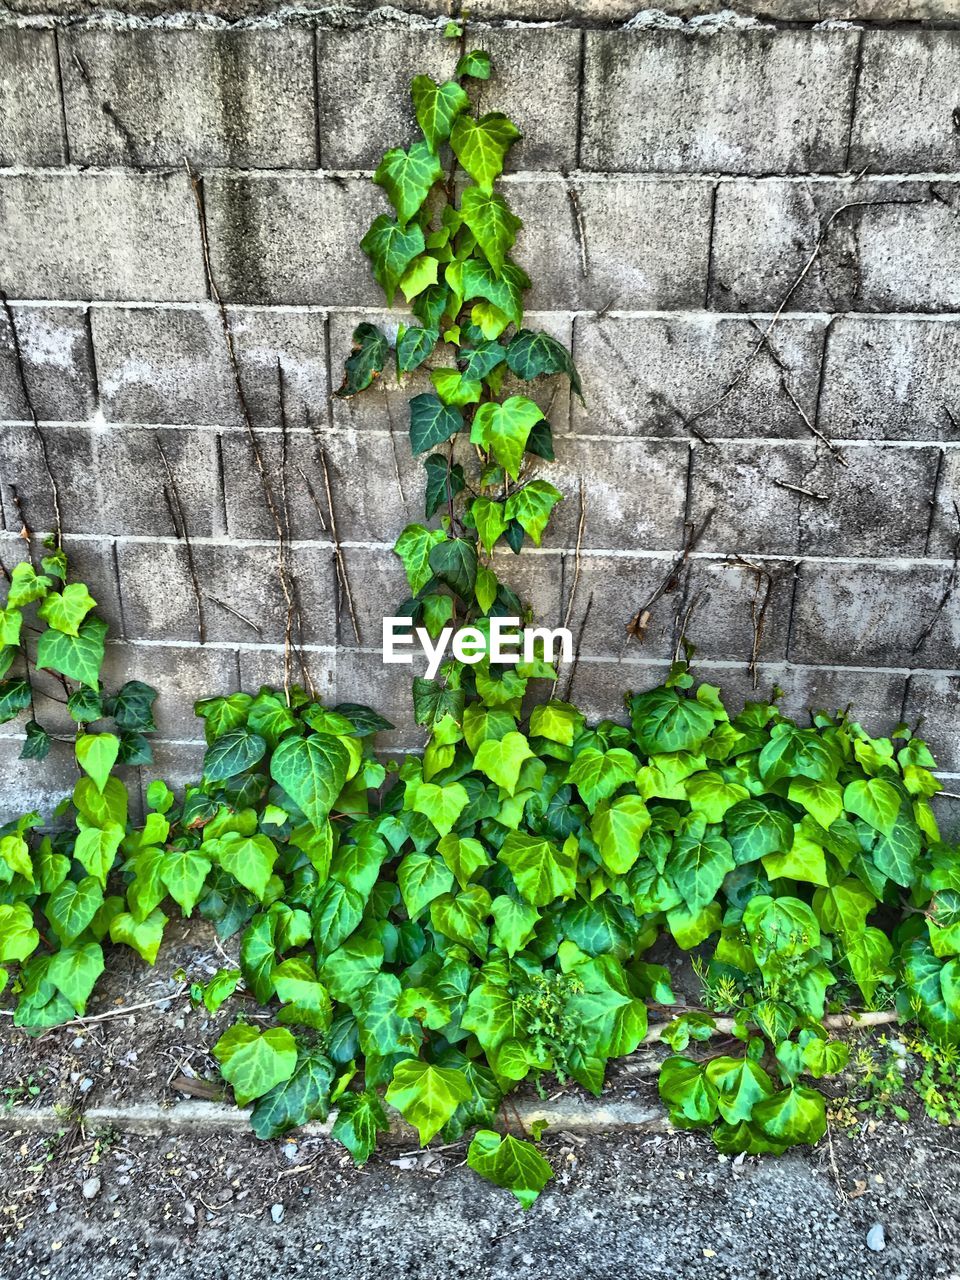 PLANTS GROWING ON A WALL